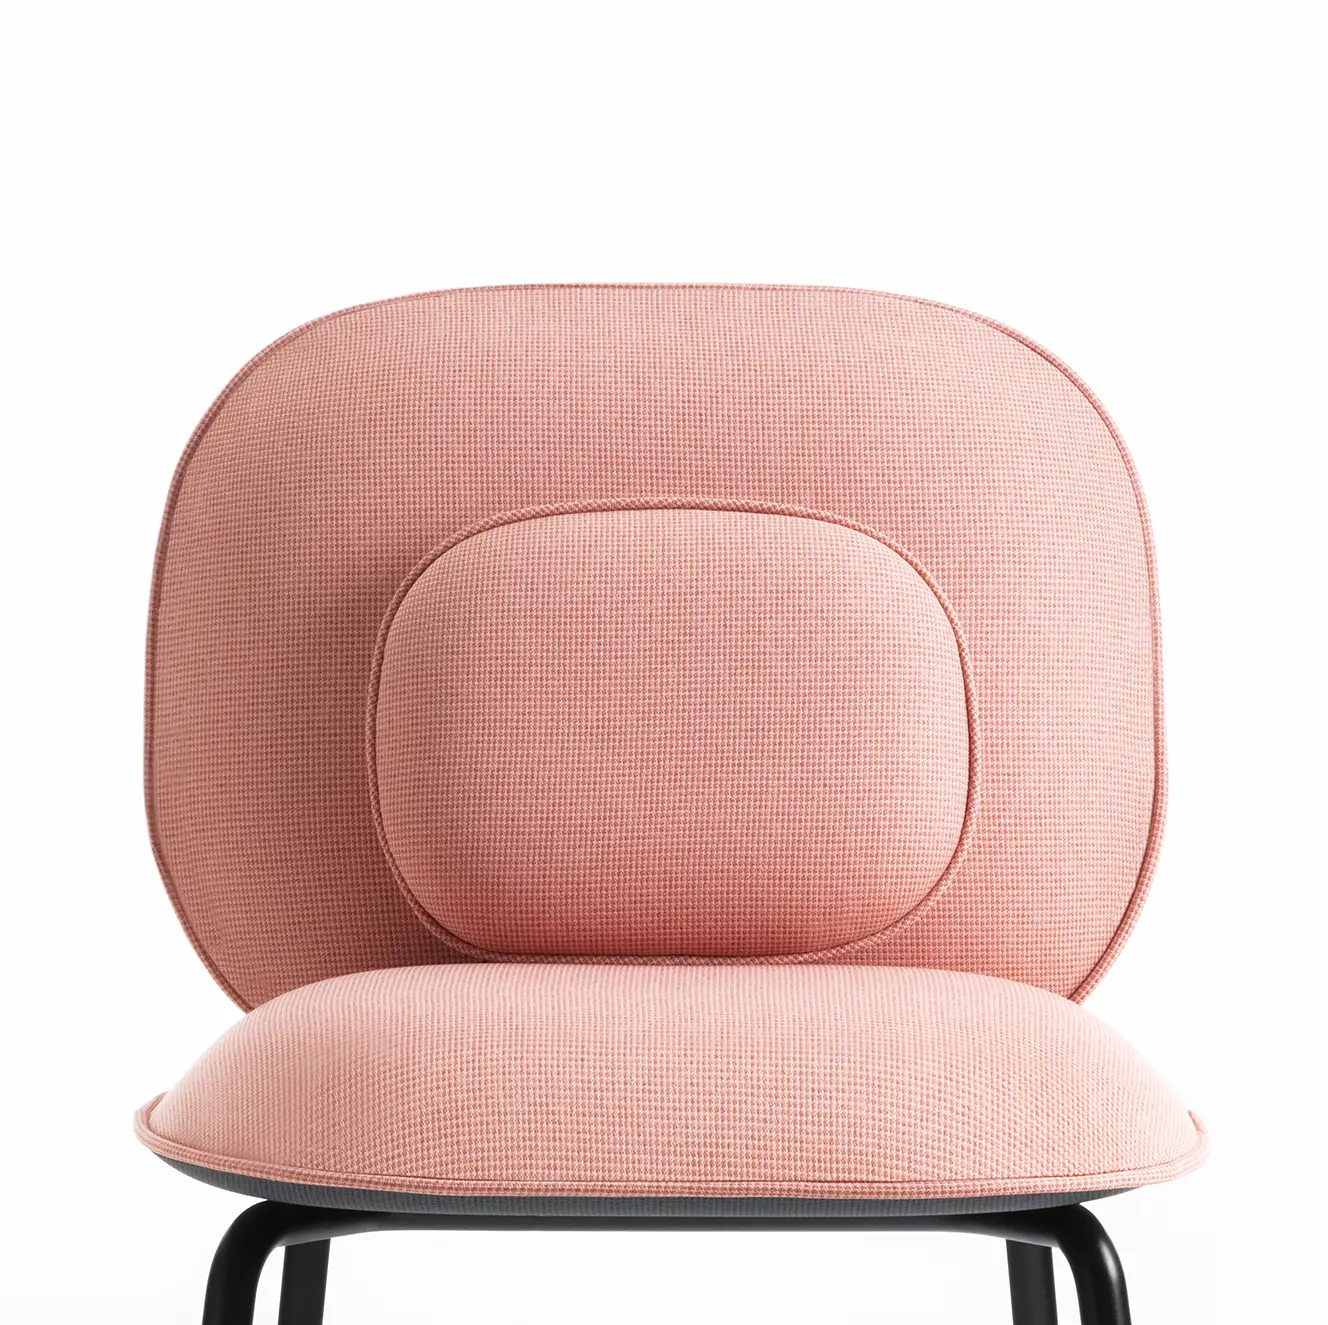 Tasca lounge chair by TOOU